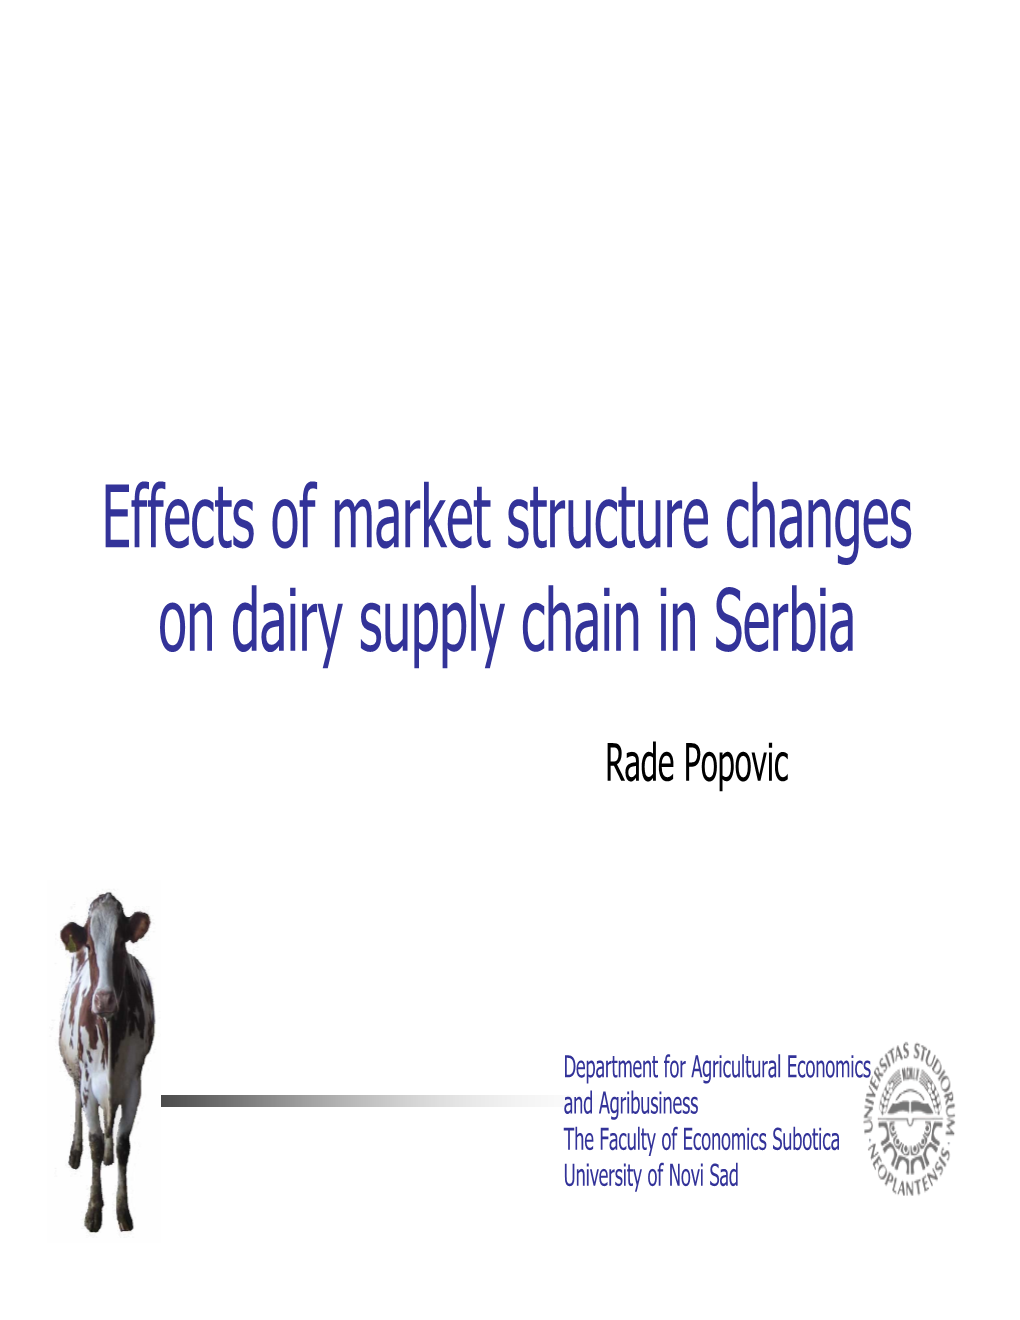 Effects of Market Structure Changes on Dairy Supply Chain in Serbia